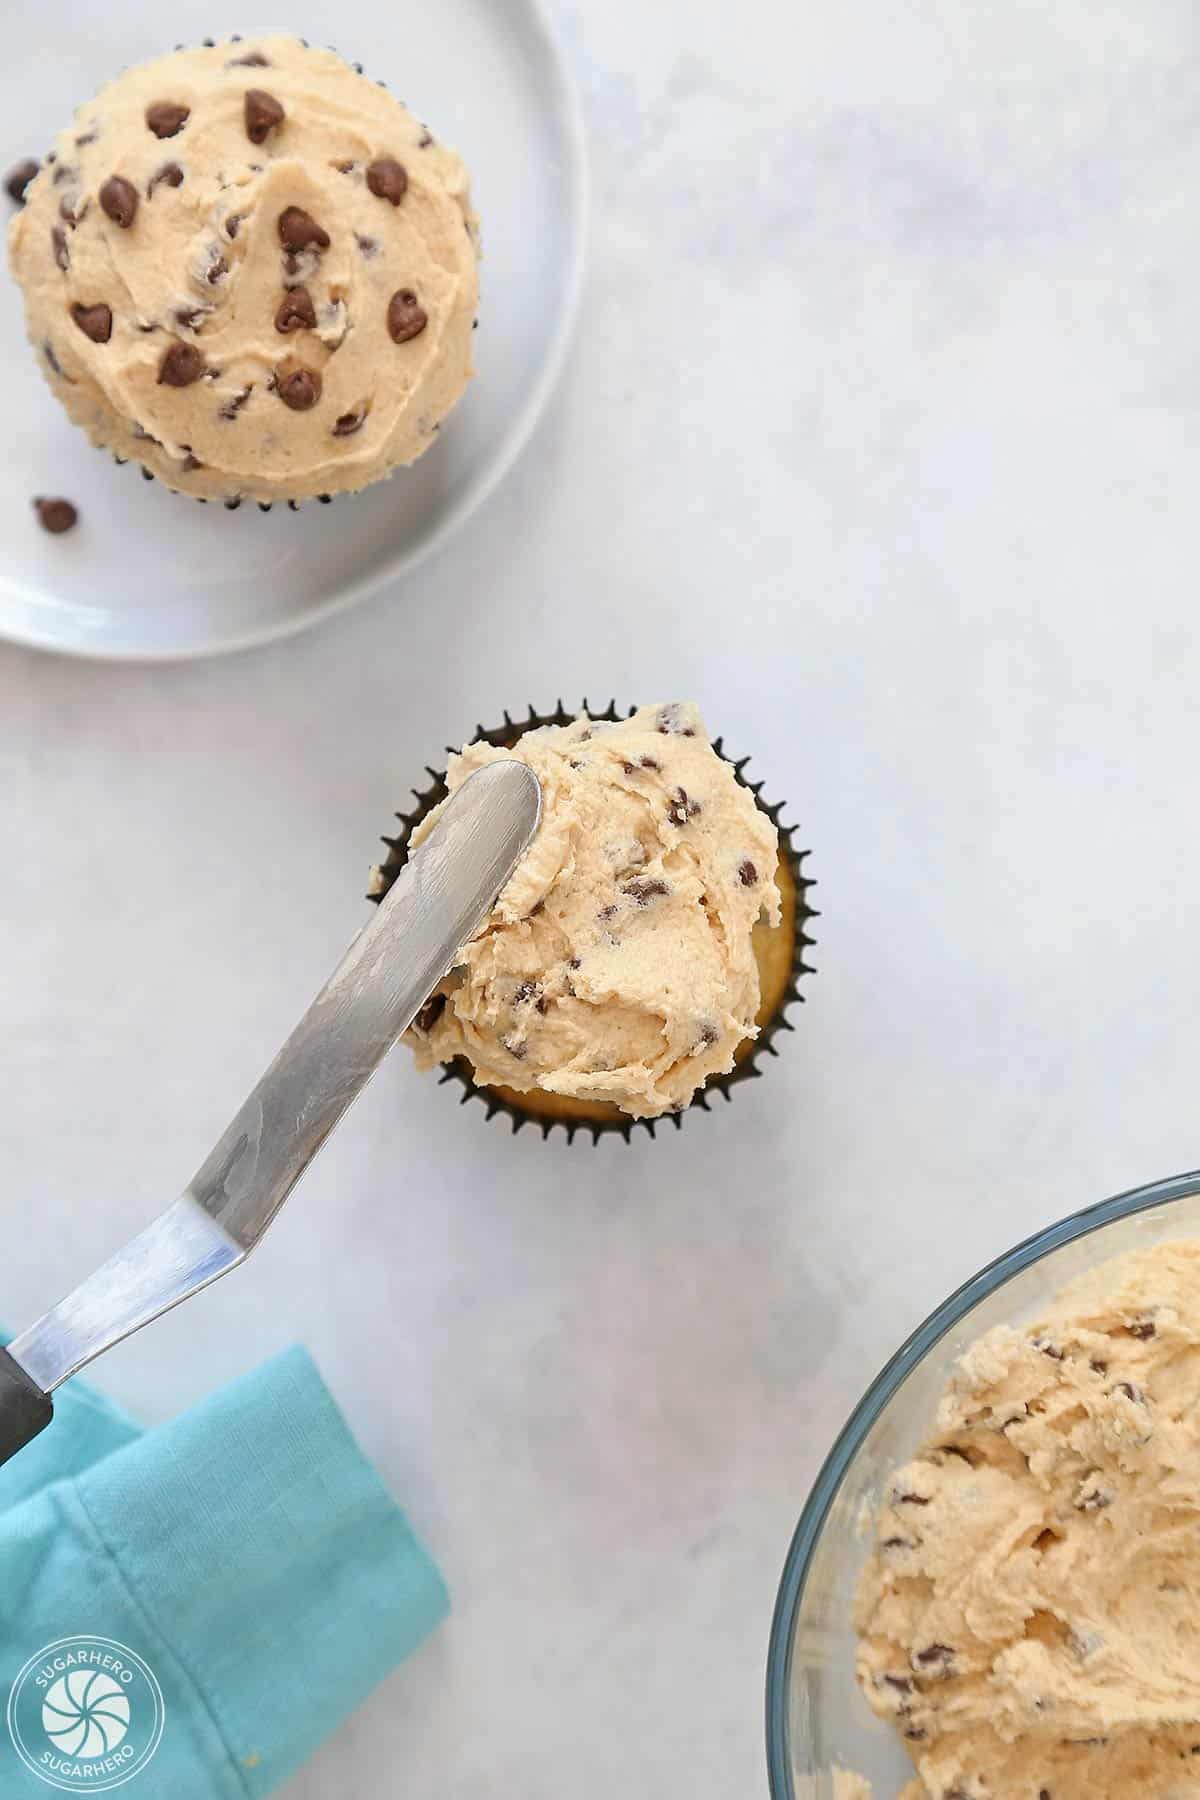 Offset spatula spreading froting on a cupcake.